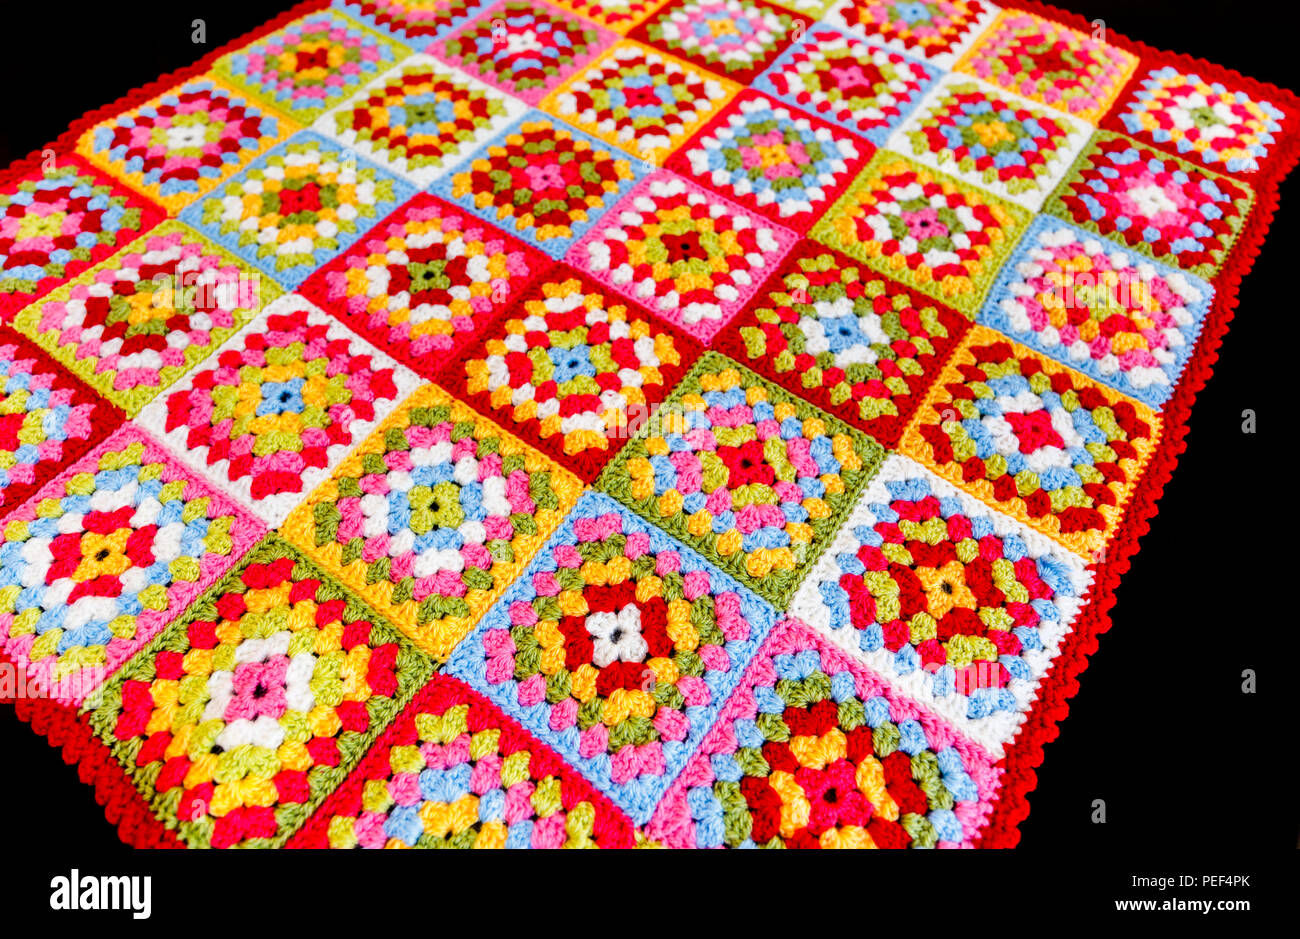 Brightly coloured granny square woollen baby blanket, traditional hand made crochet home handicraft, against a black background Stock Photo